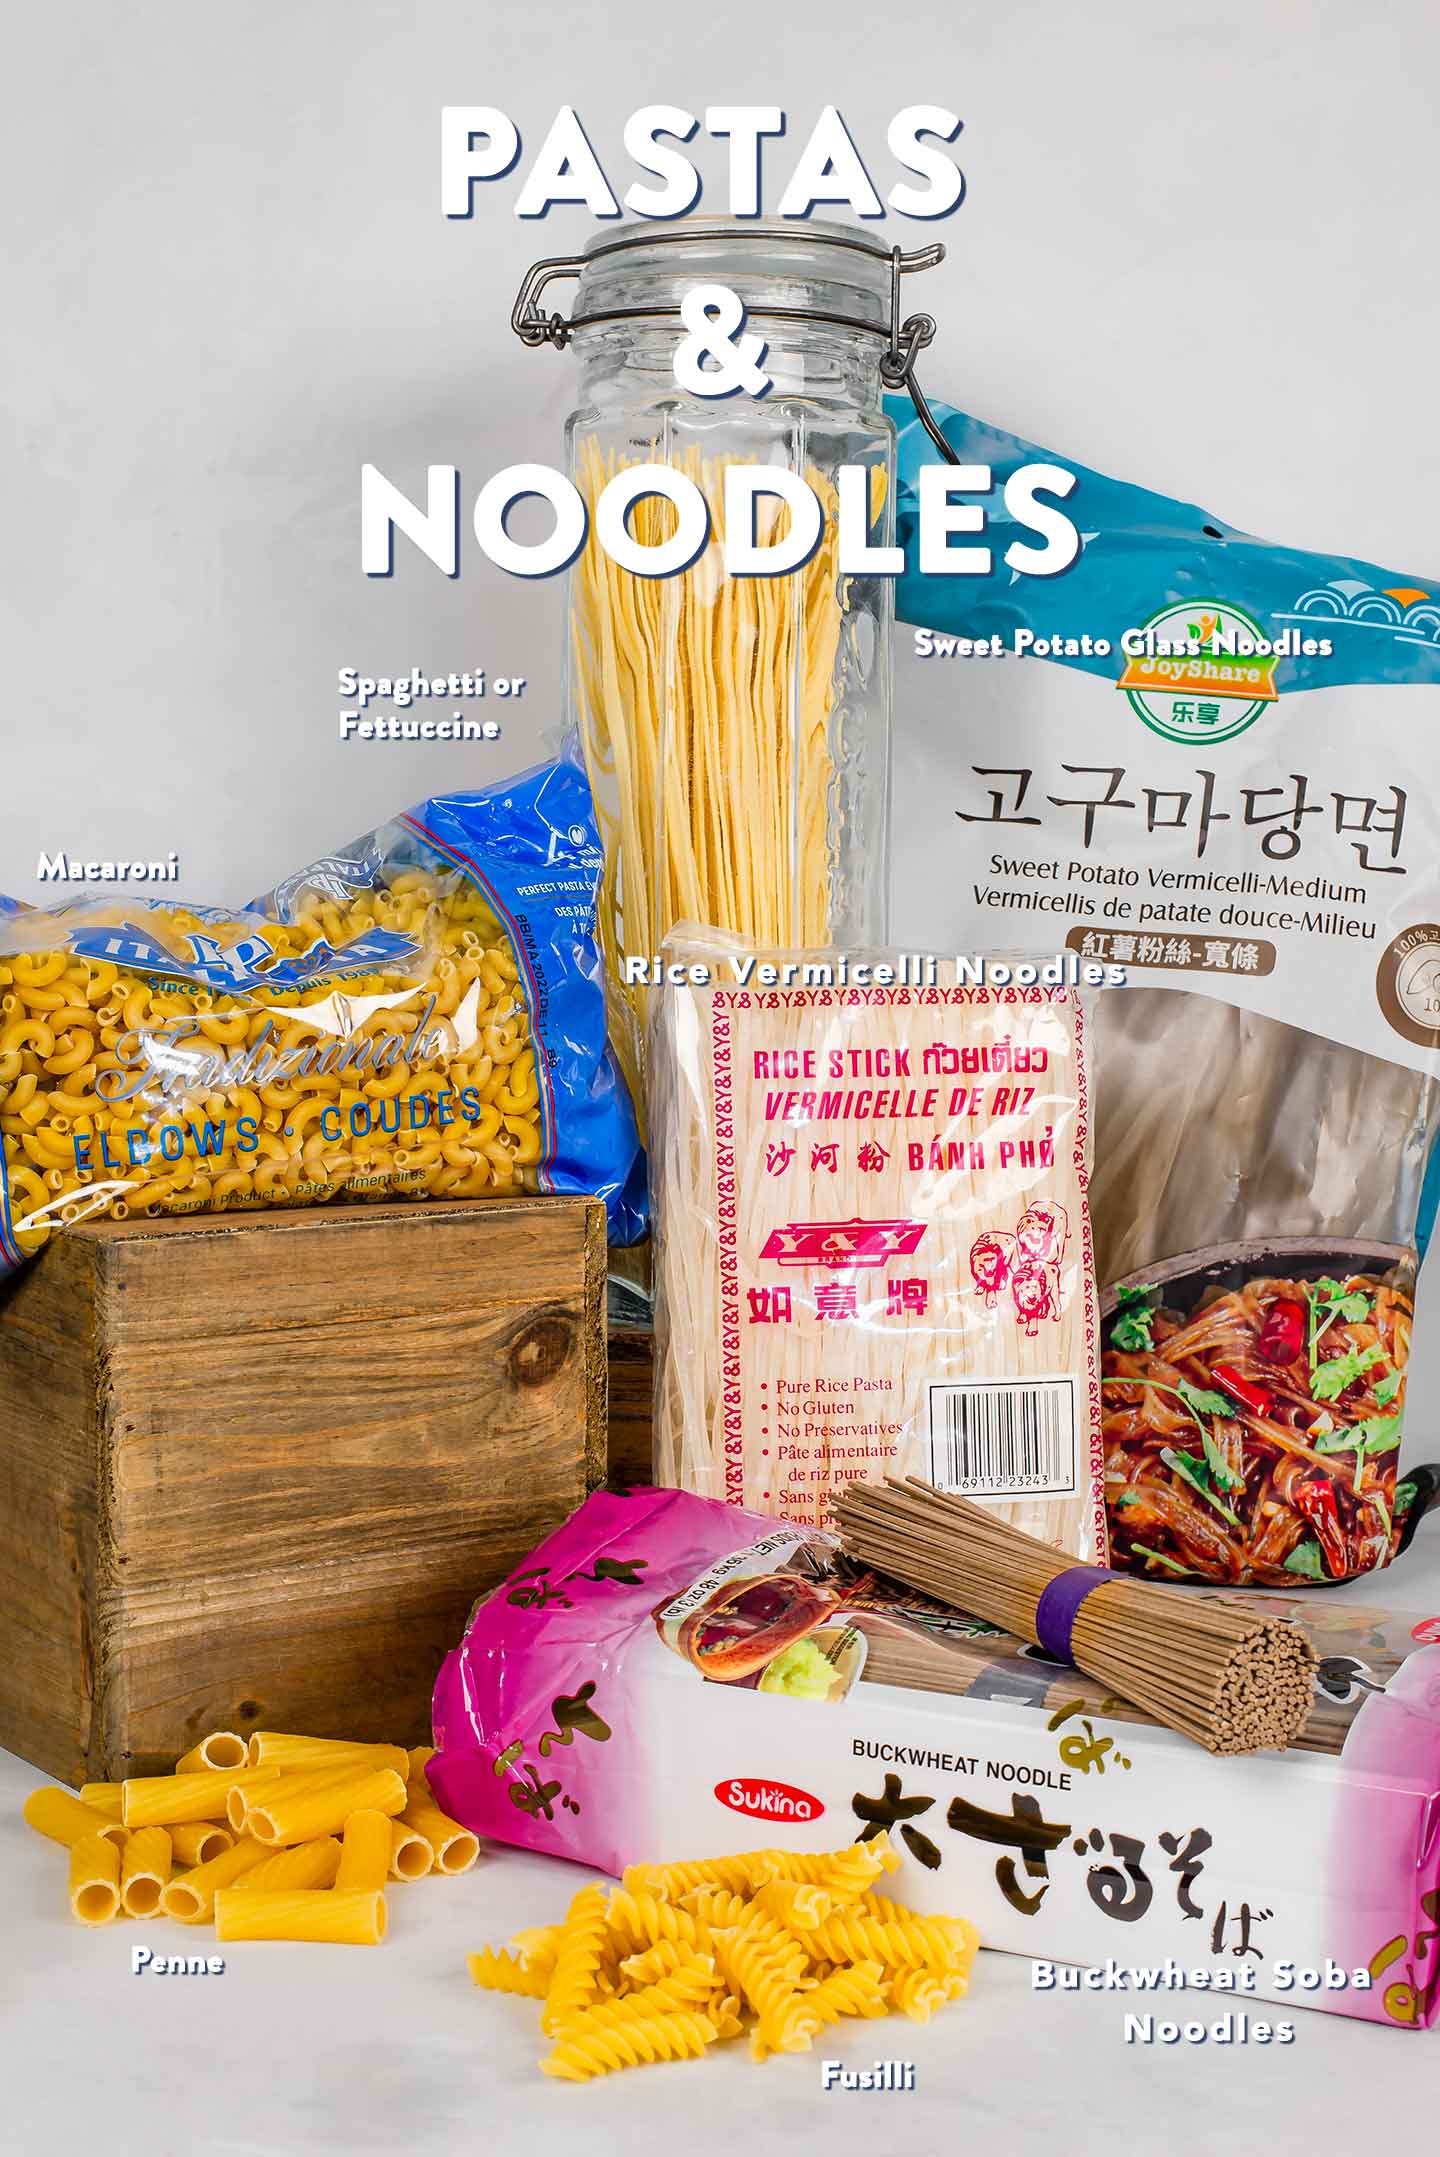 A display of pastas and noodles including spaghetti, macaroni, and various asian noodles in our pantry tips.